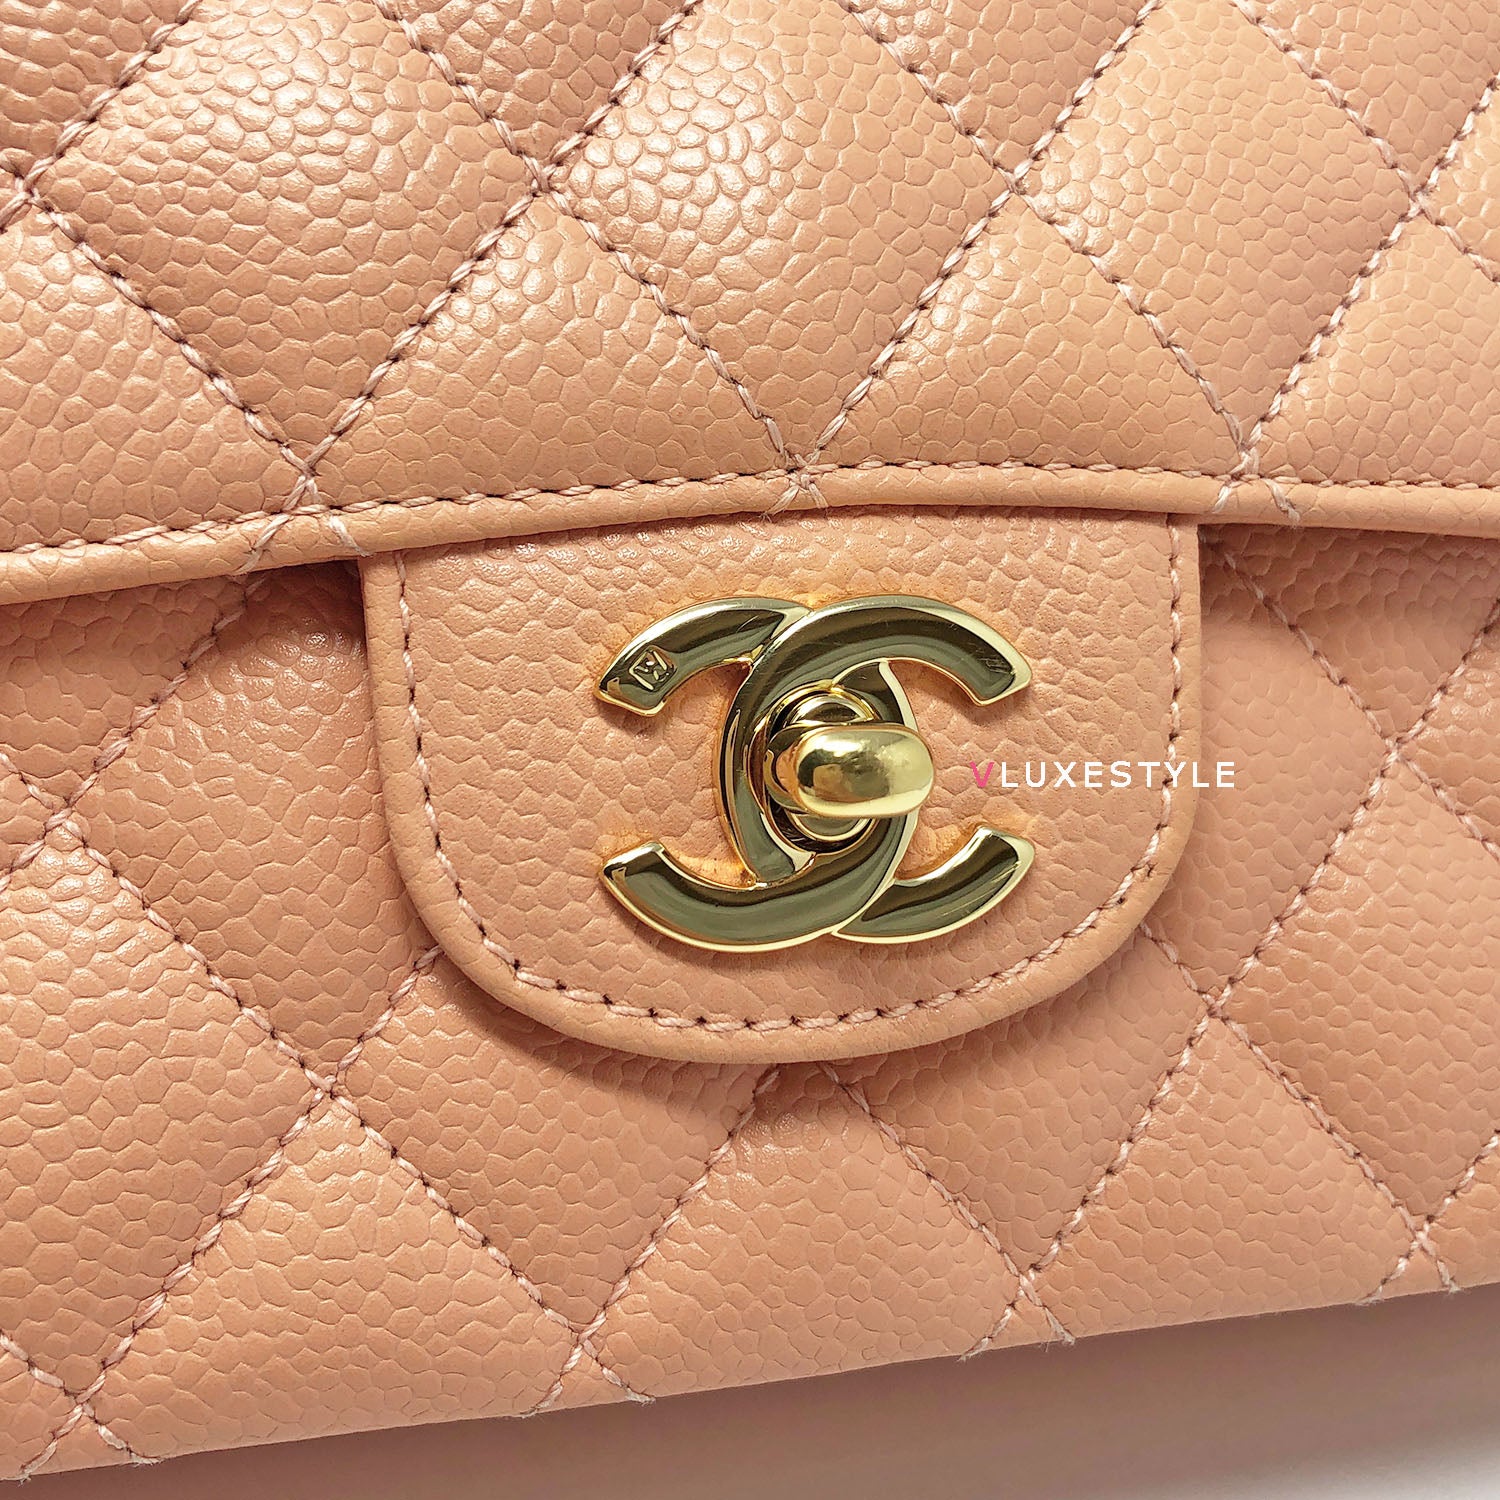 Chanel Vintage Classic Medium Double Flap Salmon Pink Quilted Caviar with 24k  gold plated hardware